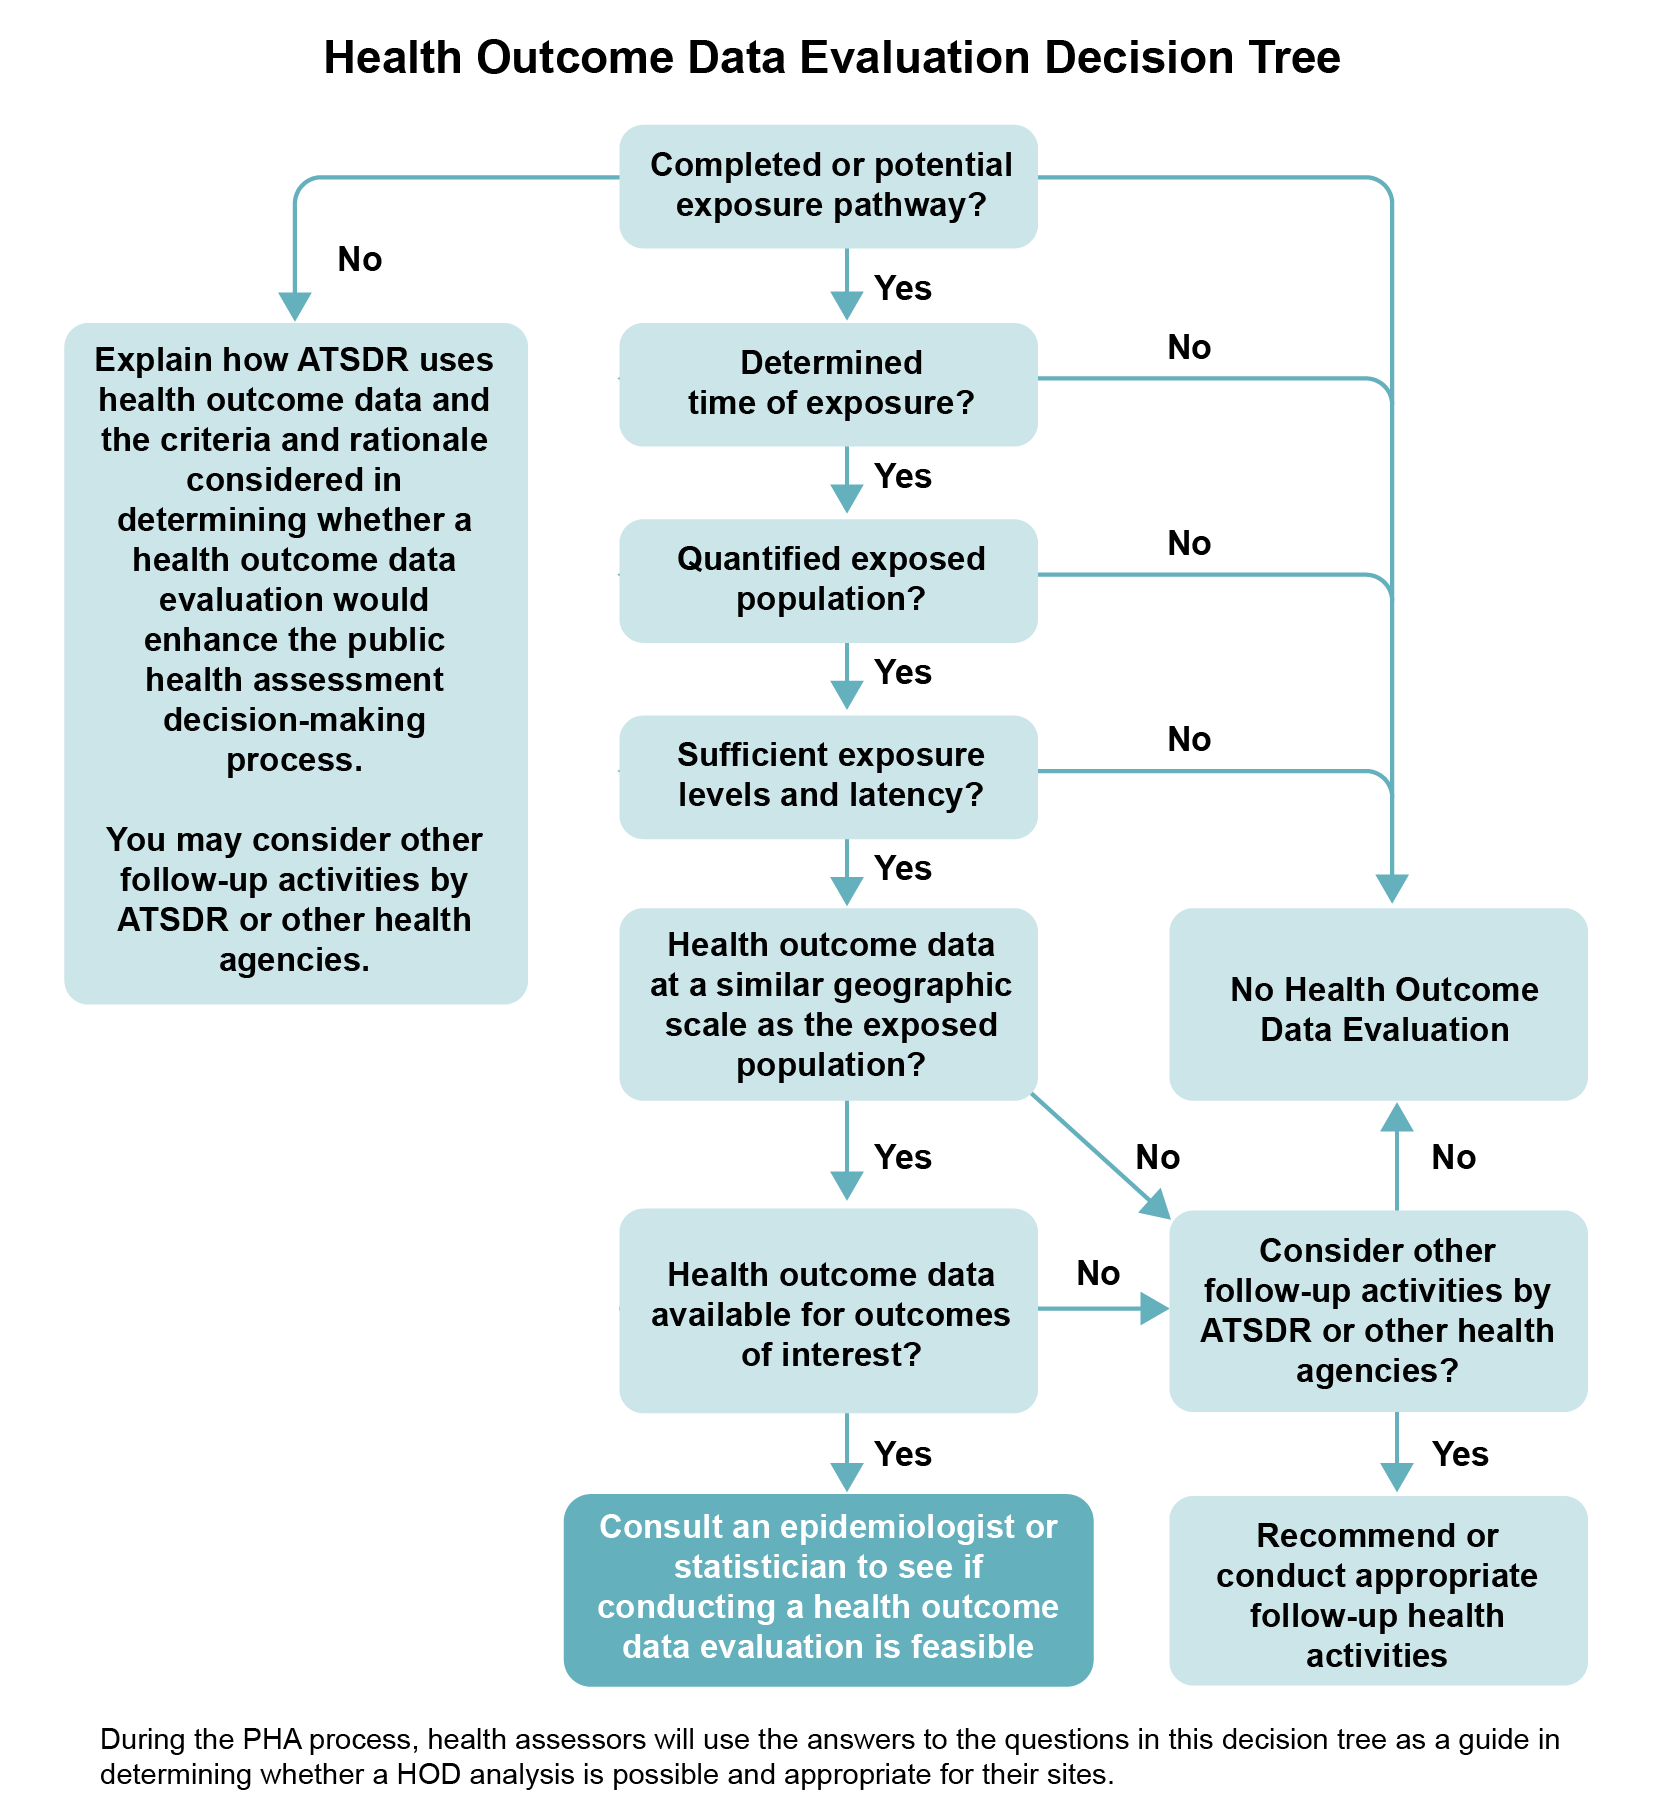 Health Outcome Data Evaluation Decision Tree. For a detailed description, follow link below the image.